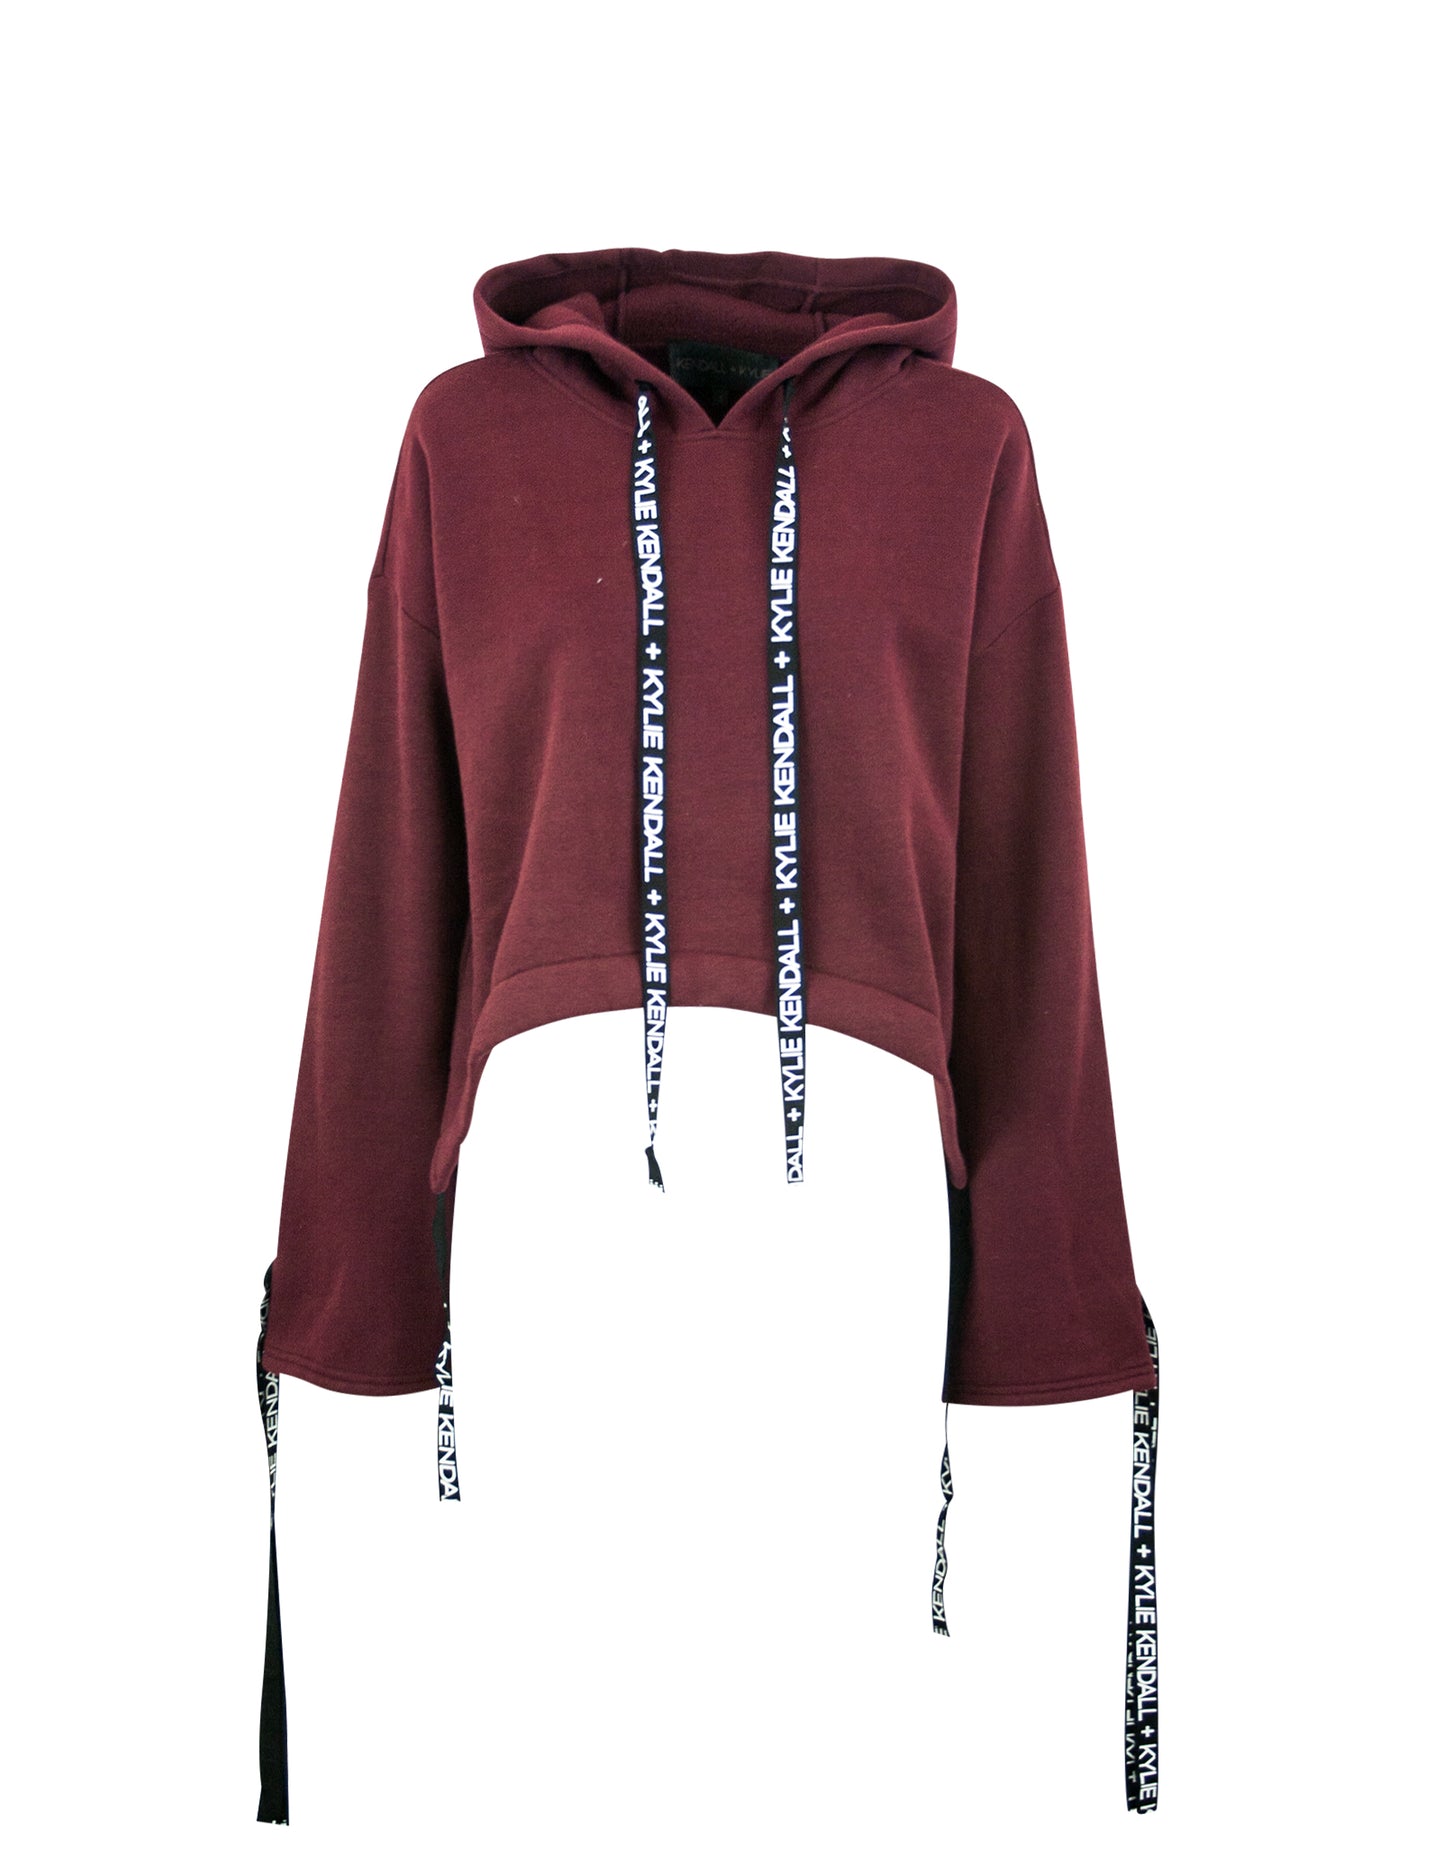 KENDALL AND KYLIE
Crop sweatshirt with Kendall + Kylie logo tapes